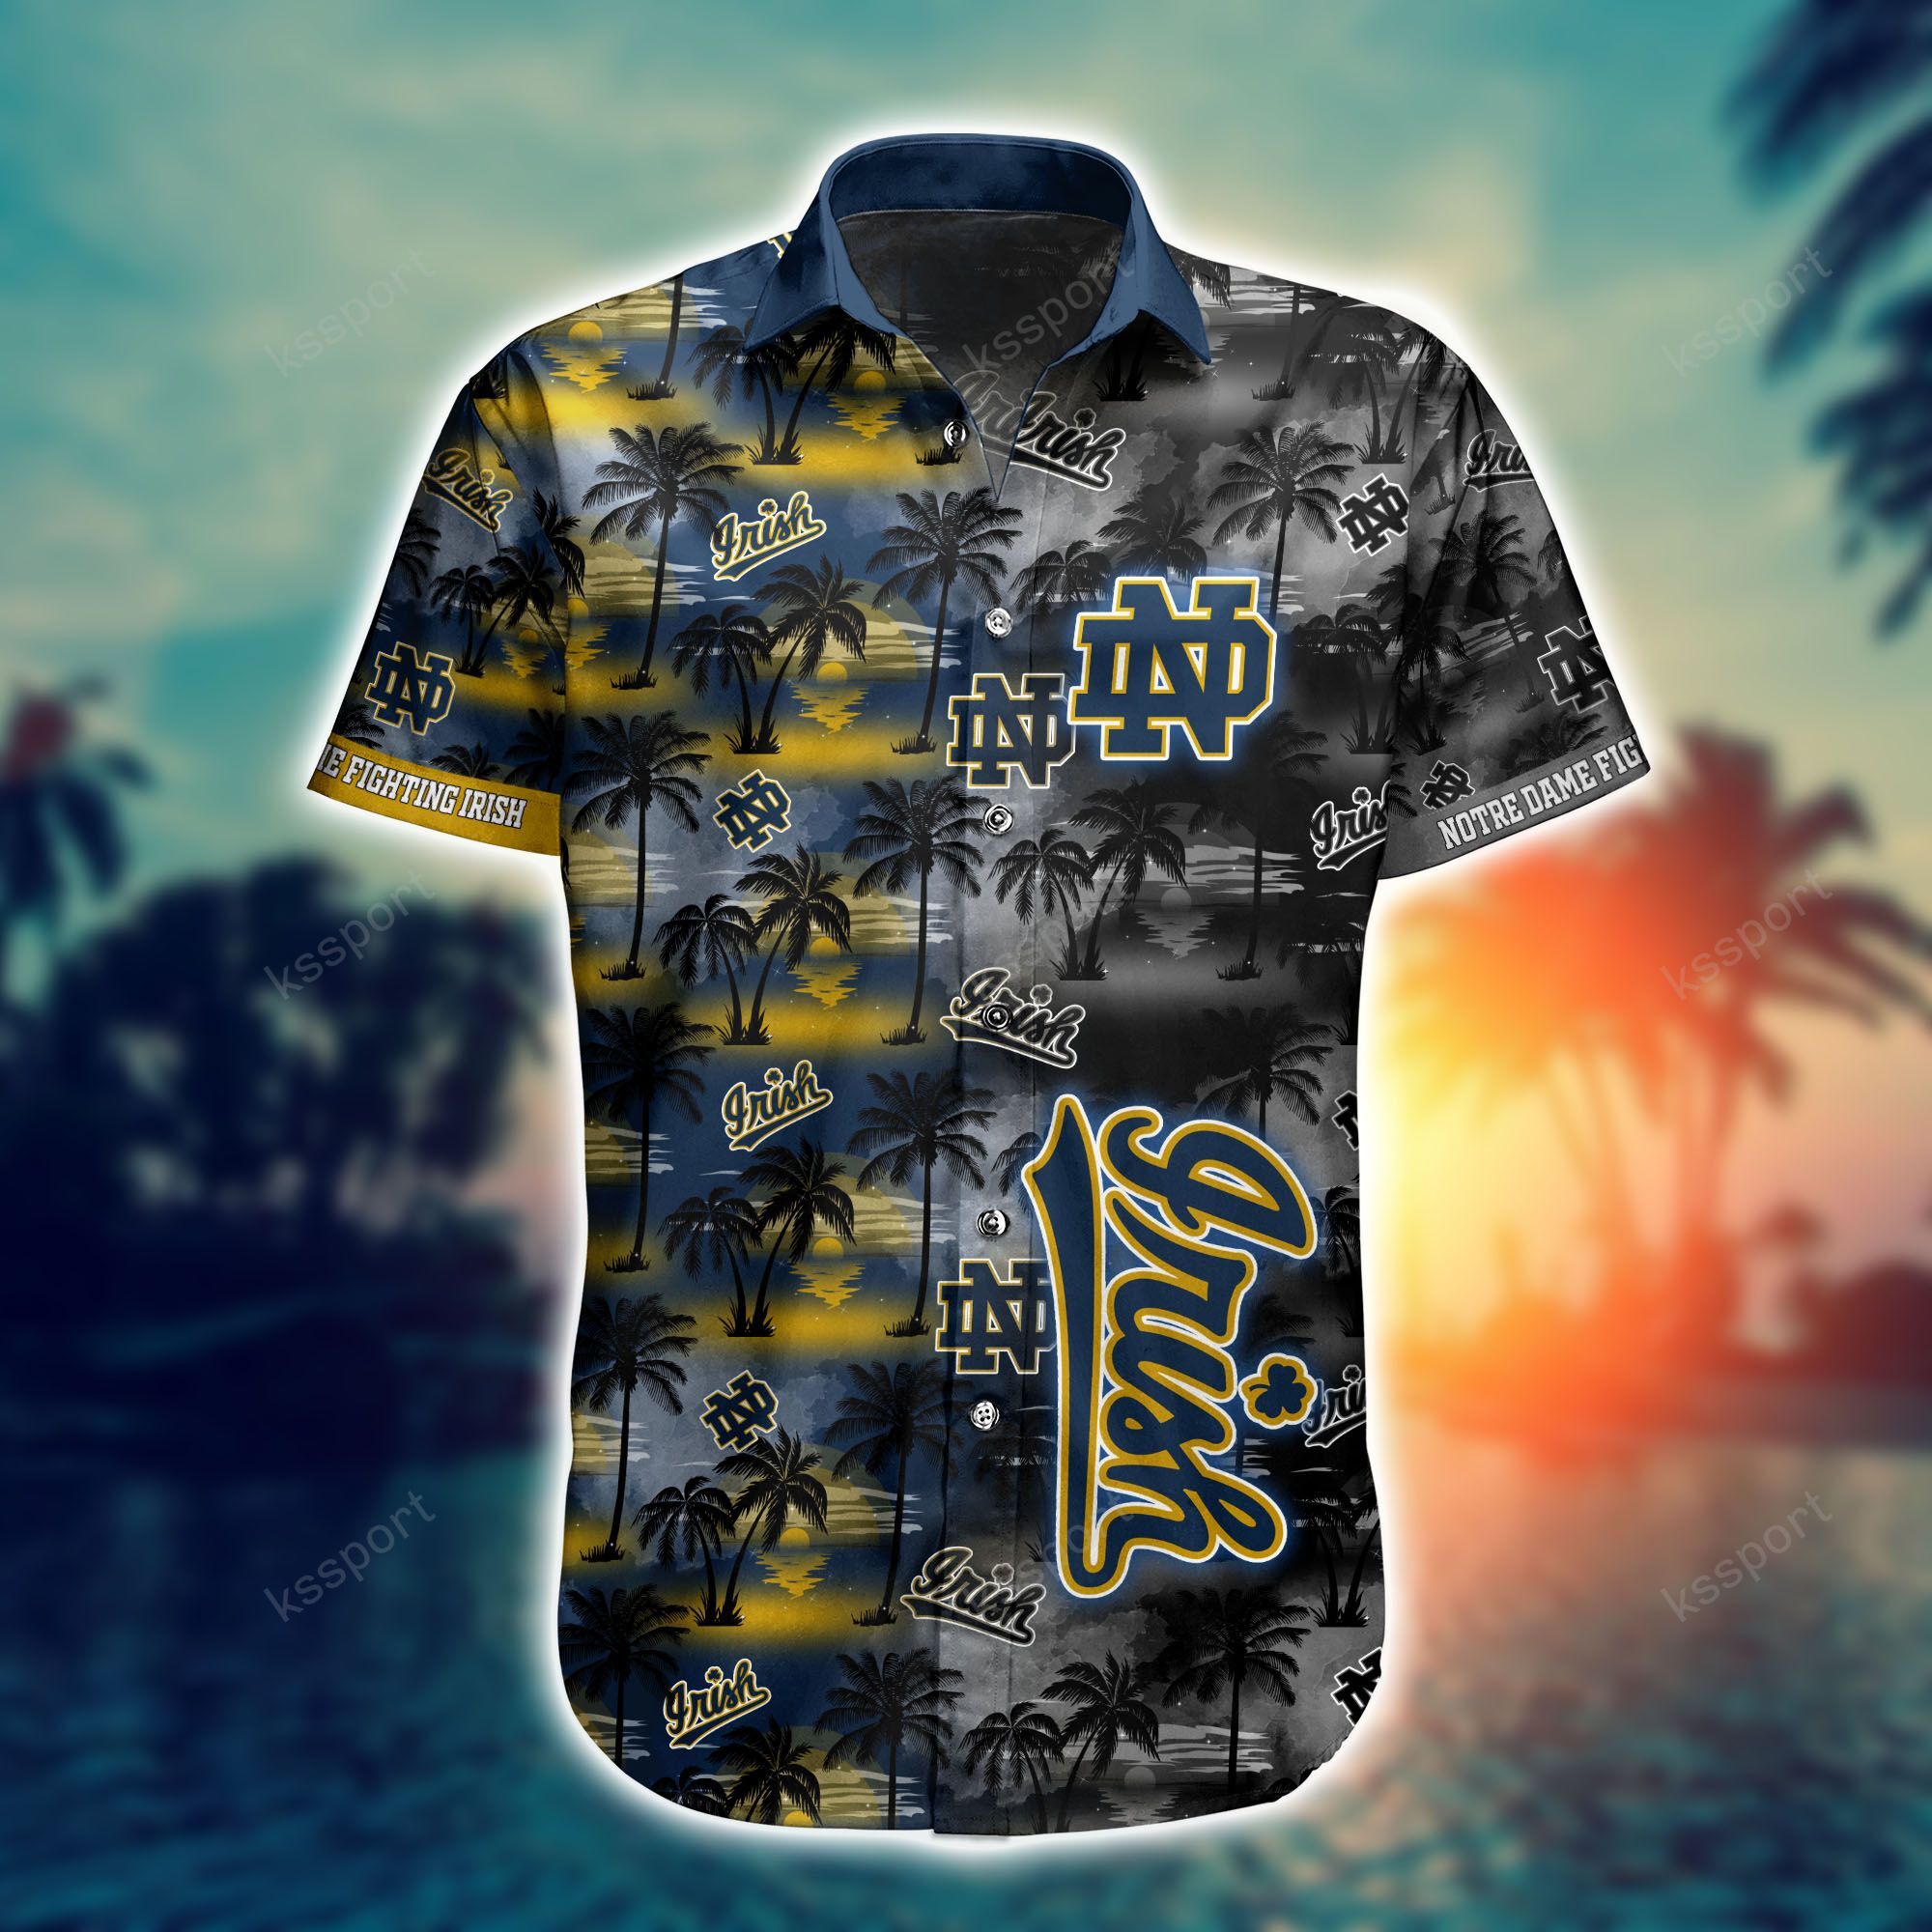 Top cool Hawaiian shirt 2022 - Make sure you get yours today before they run out! 159